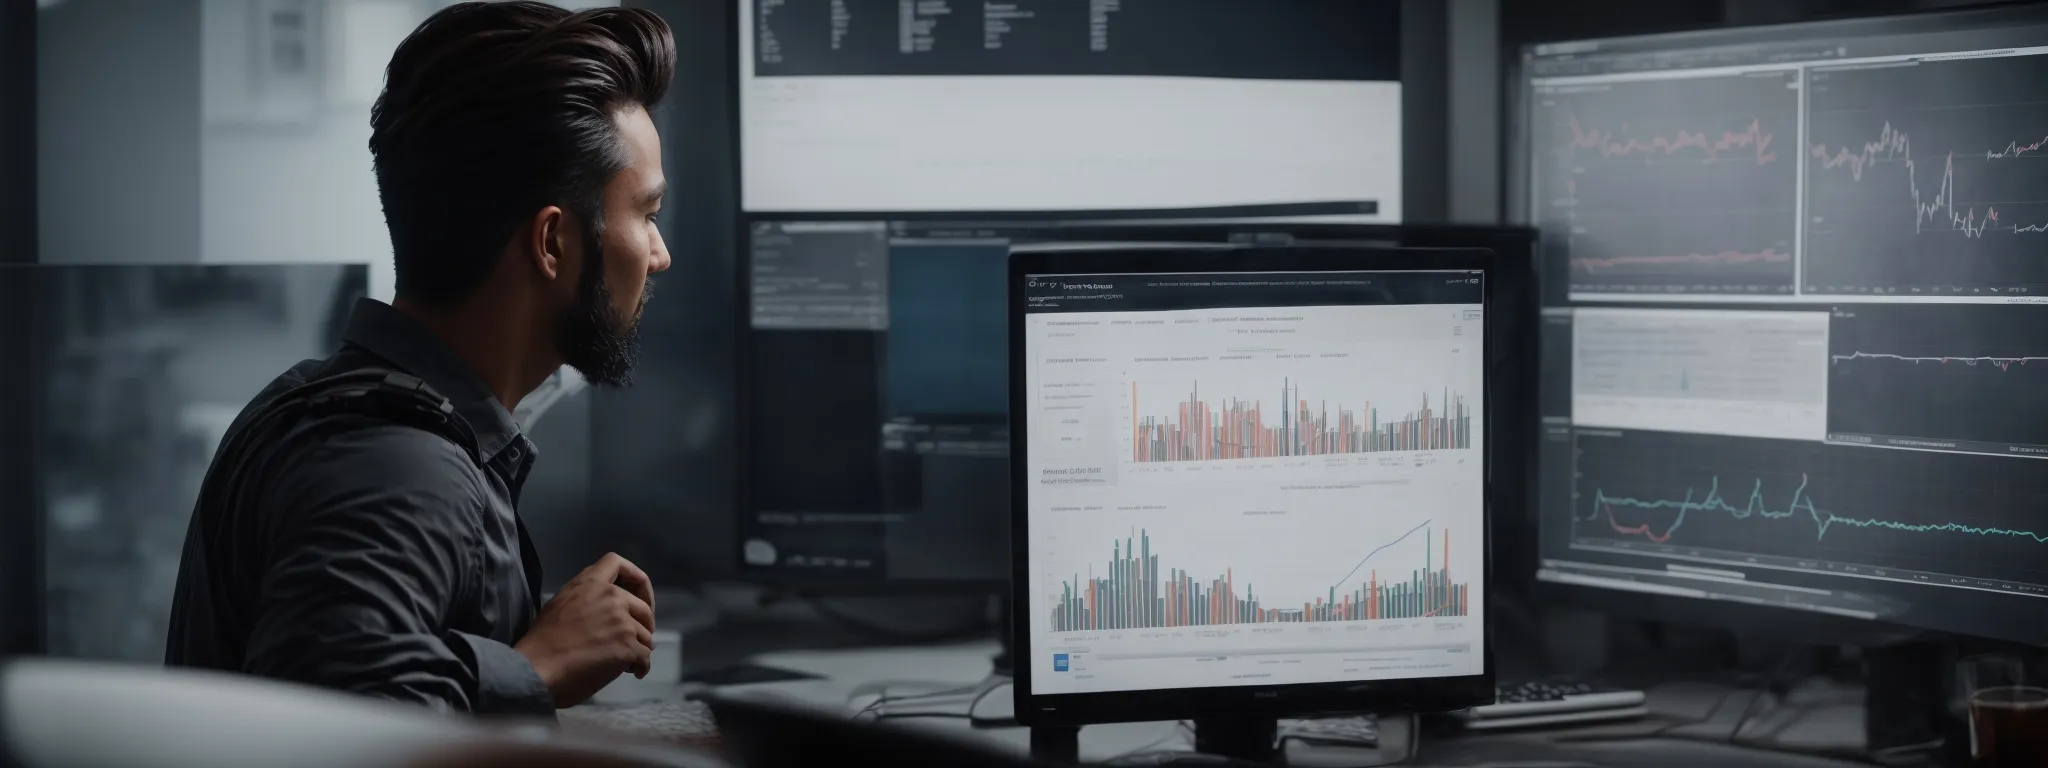 a marketer analyzes graphs on a monitor displaying seo and ppc campaign performance trends.